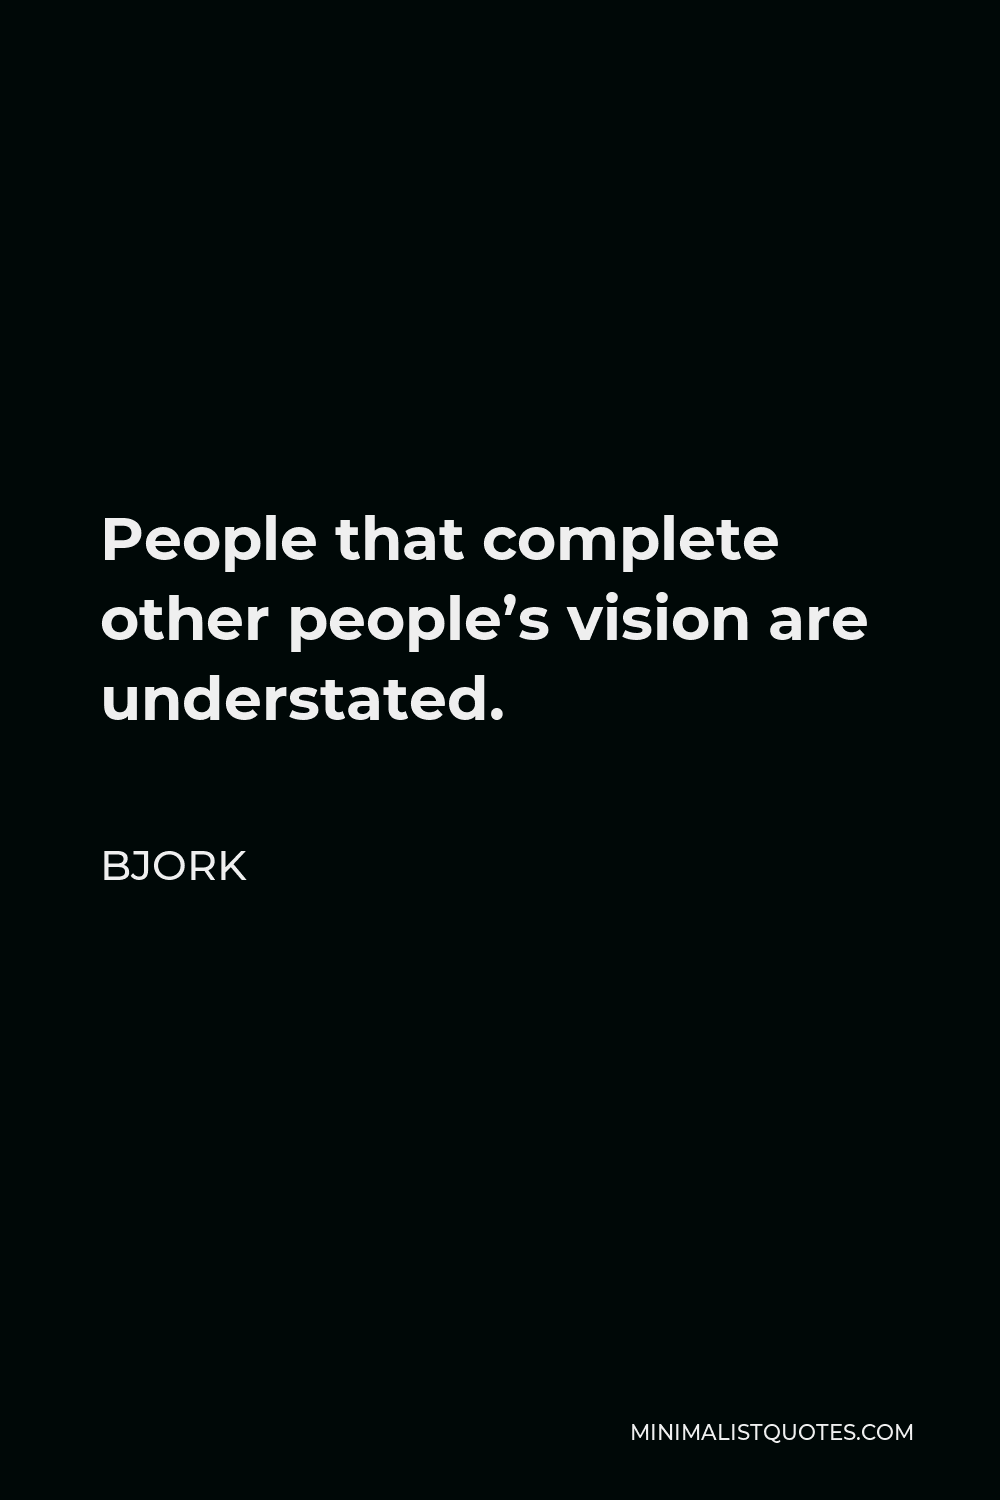 Bjork Quote - People that complete other people’s vision are understated.